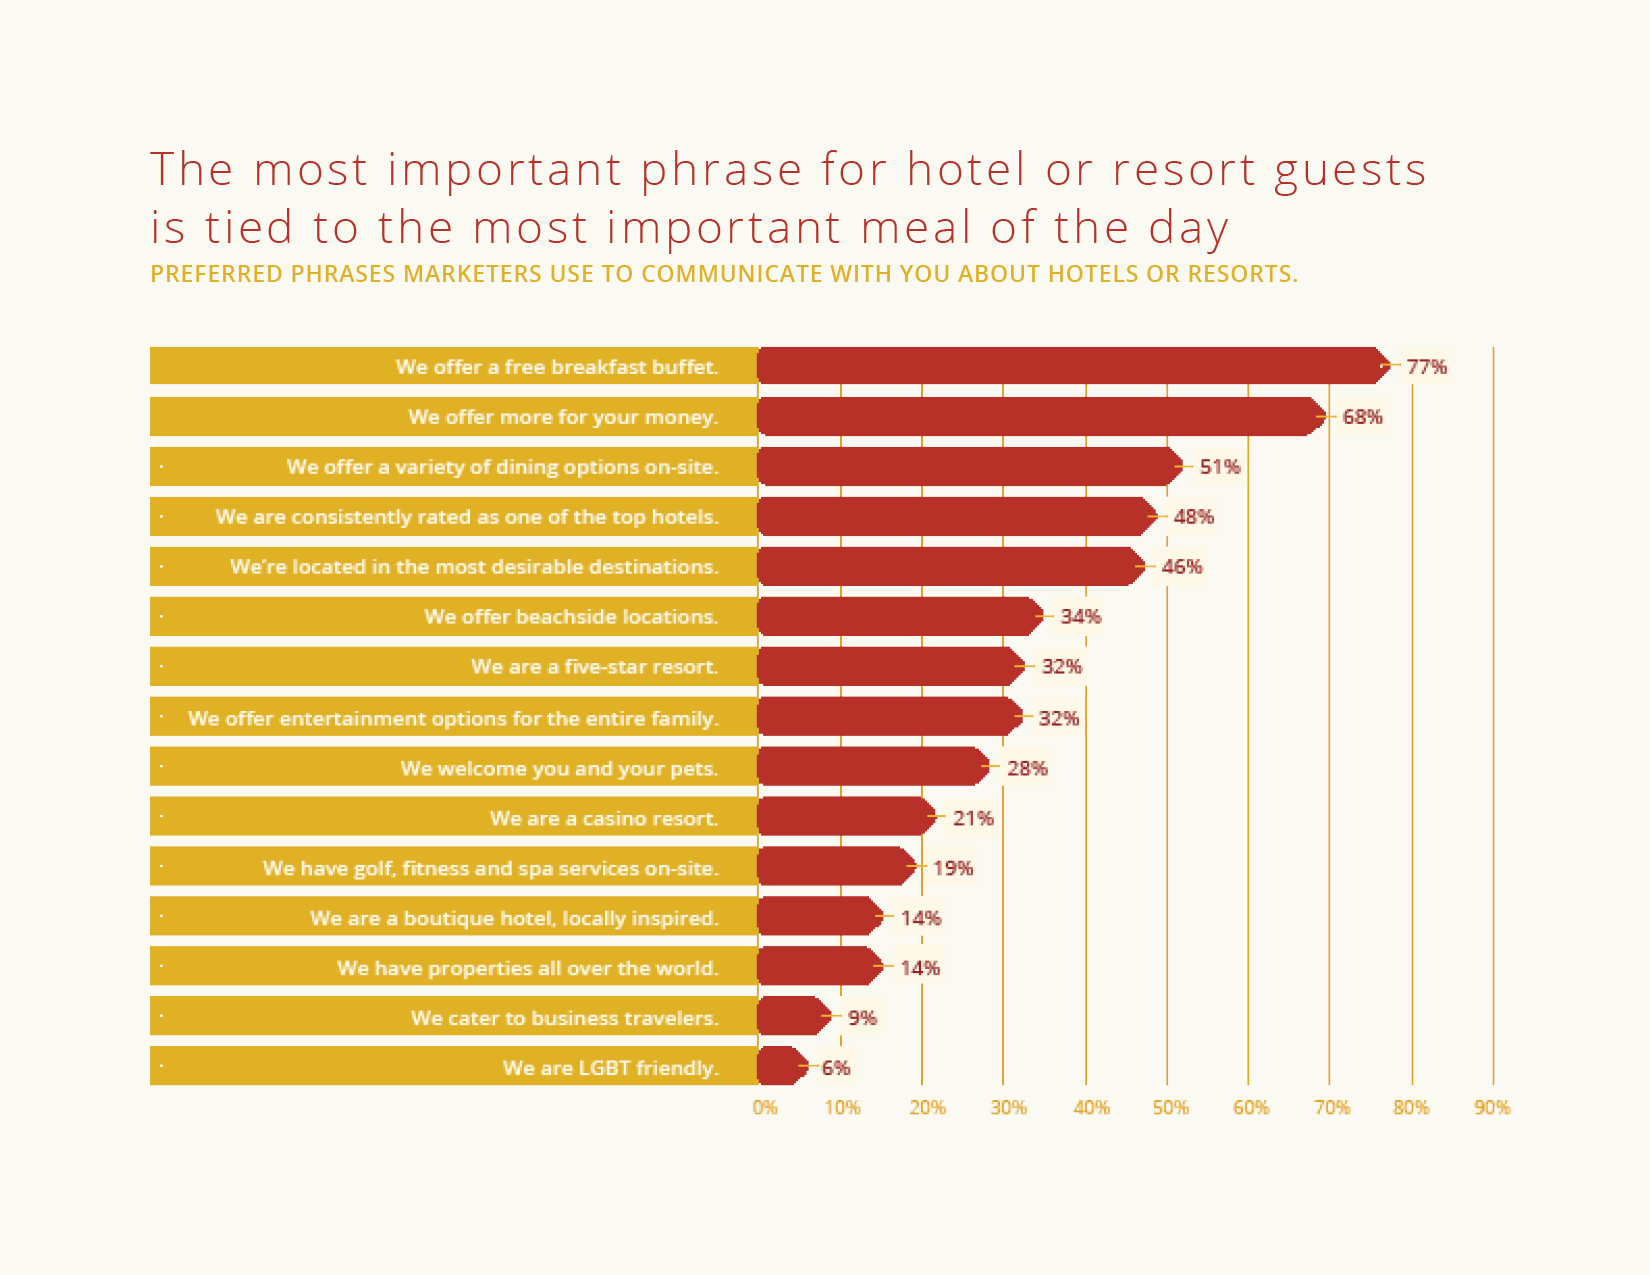 The Most Important Phrase for Hotel Guests is Tied to the Most Important Meal of the Day